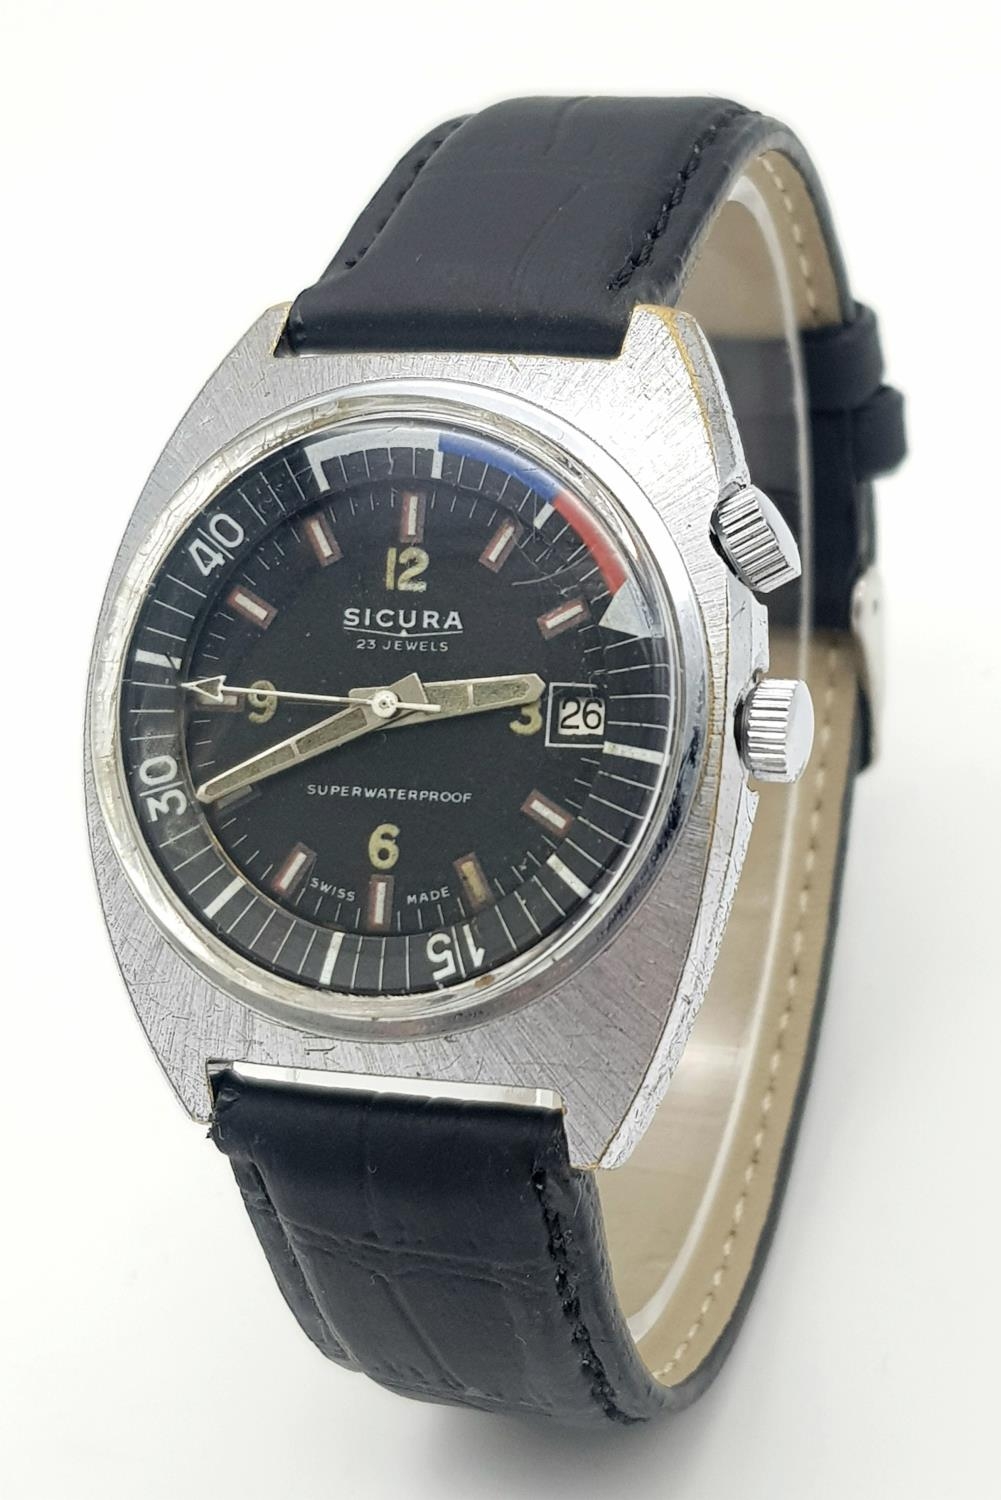 A Vintage Secura 23 Jewels Mechanical Gents Watch. Black leather strap. Stainless steel case - 38mm. - Bild 2 aus 5